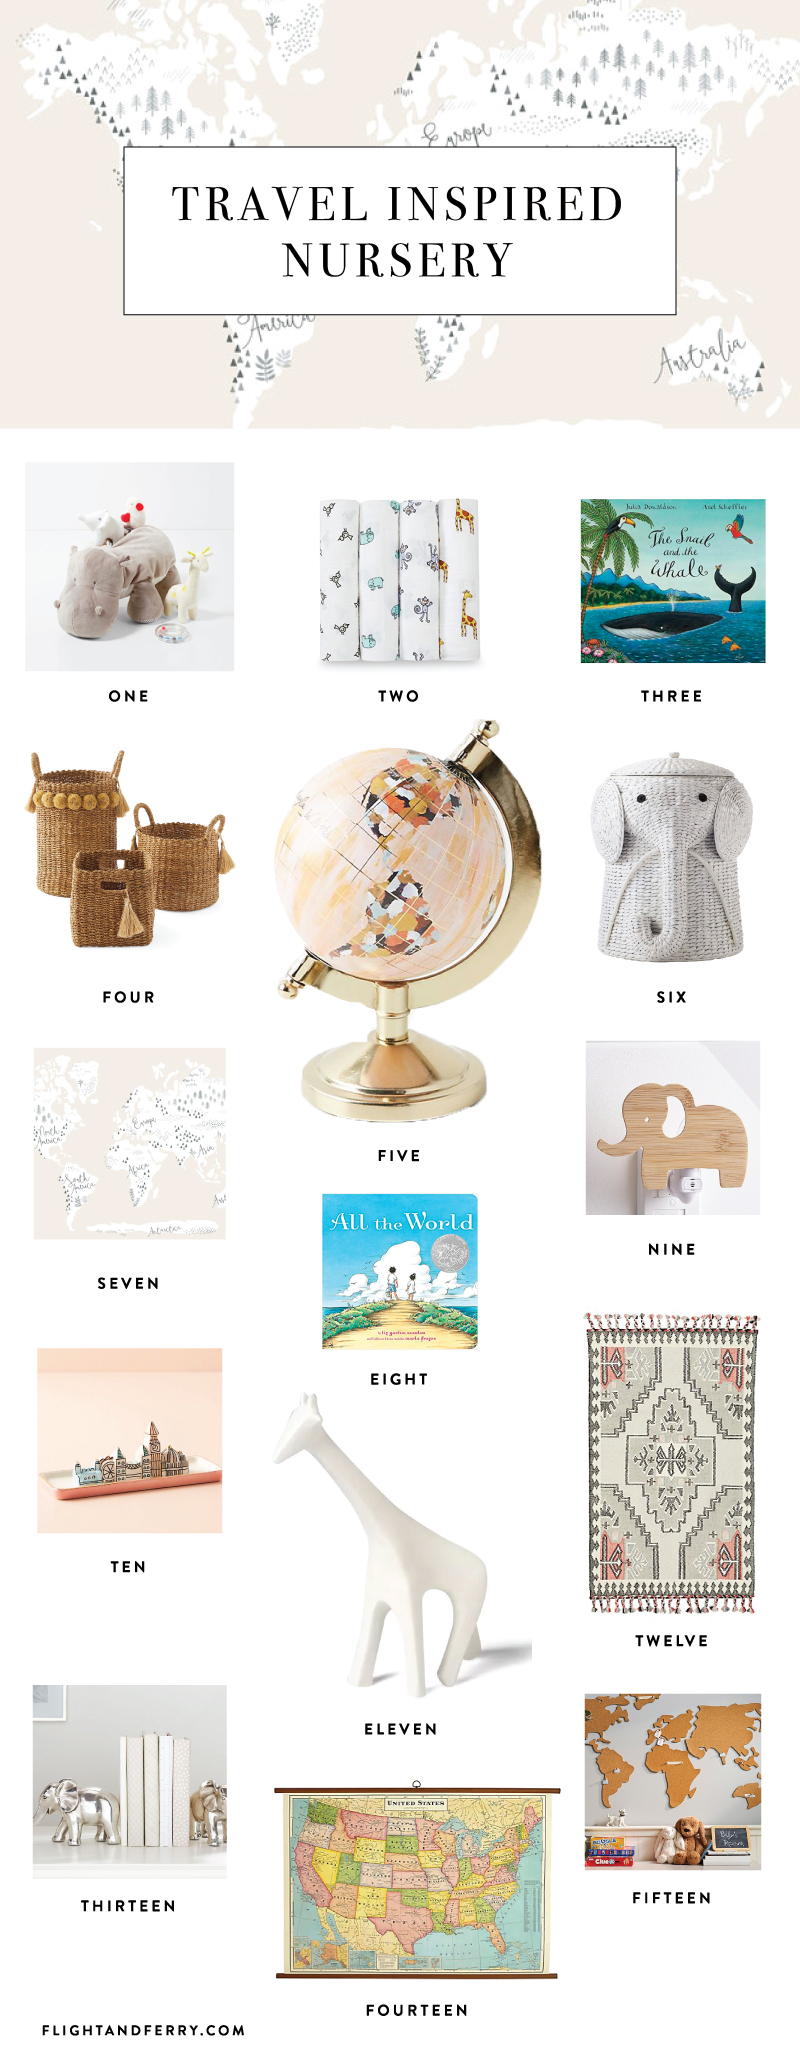 15 Decor Items for a Travel Inspired or Travel Themed Nursery!